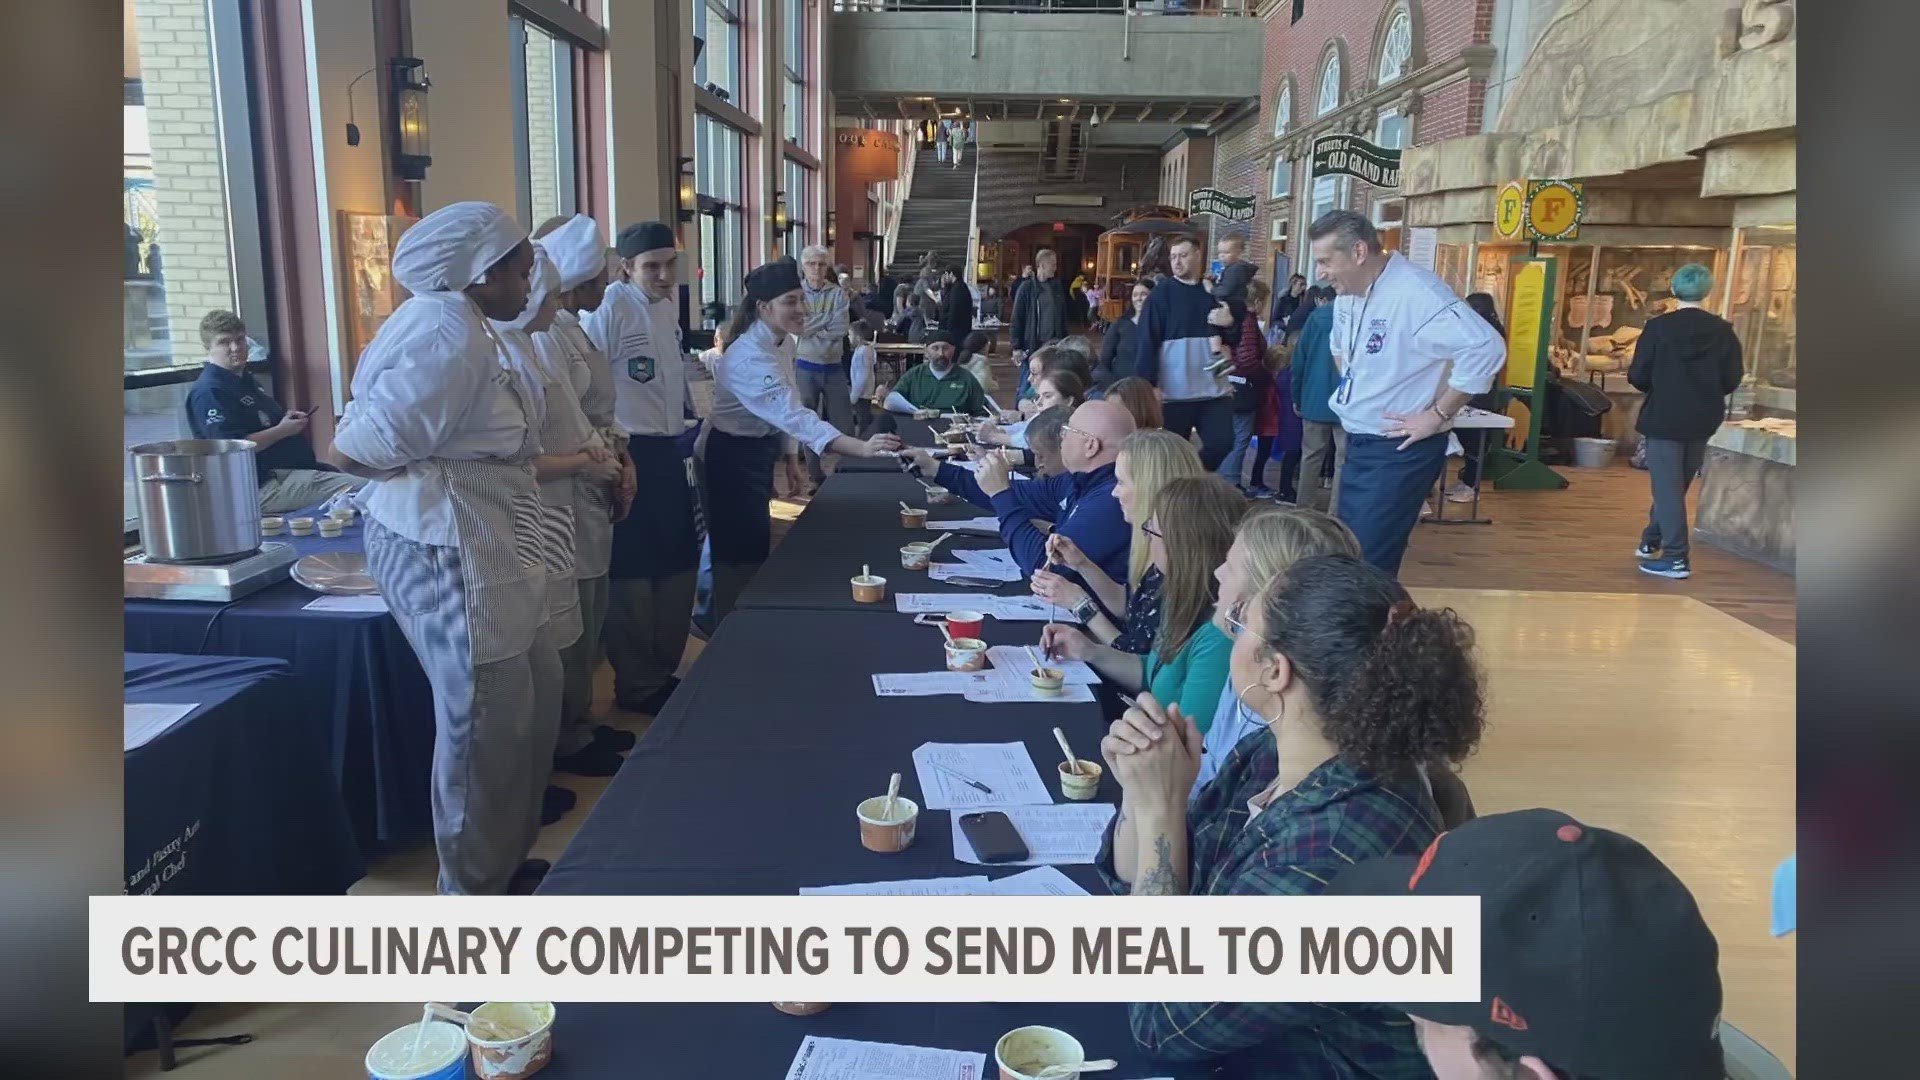 A team of culinary students at Grand Rapids Community College are finalists in a national competition to send a meal to the International Space Station.